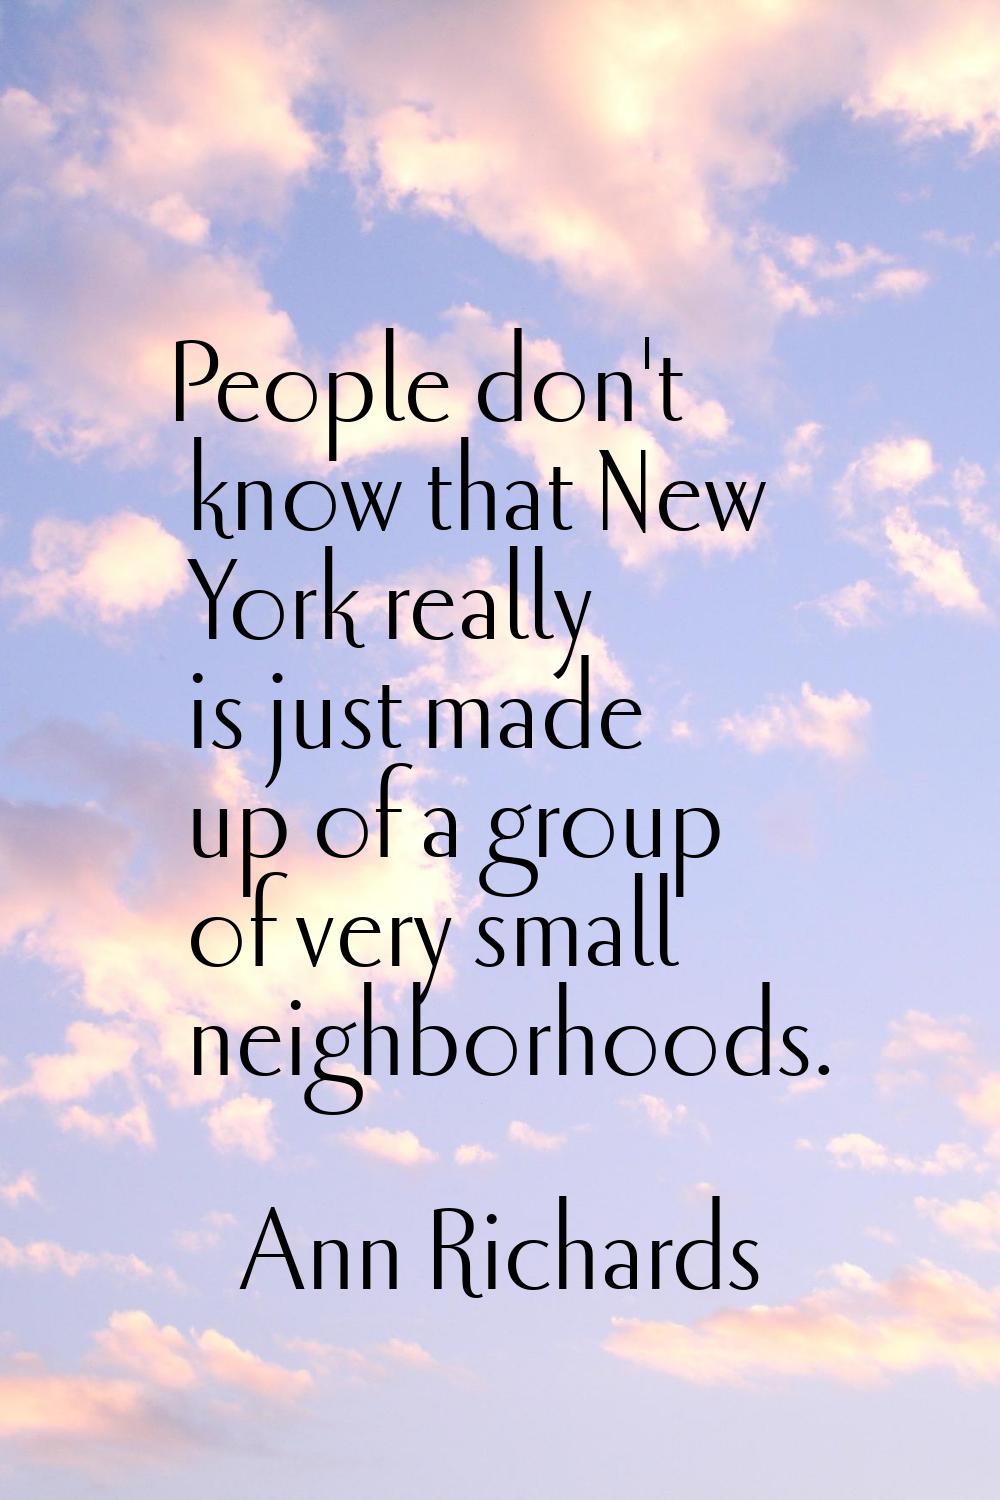 People don't know that New York really is just made up of a group of very small neighborhoods.